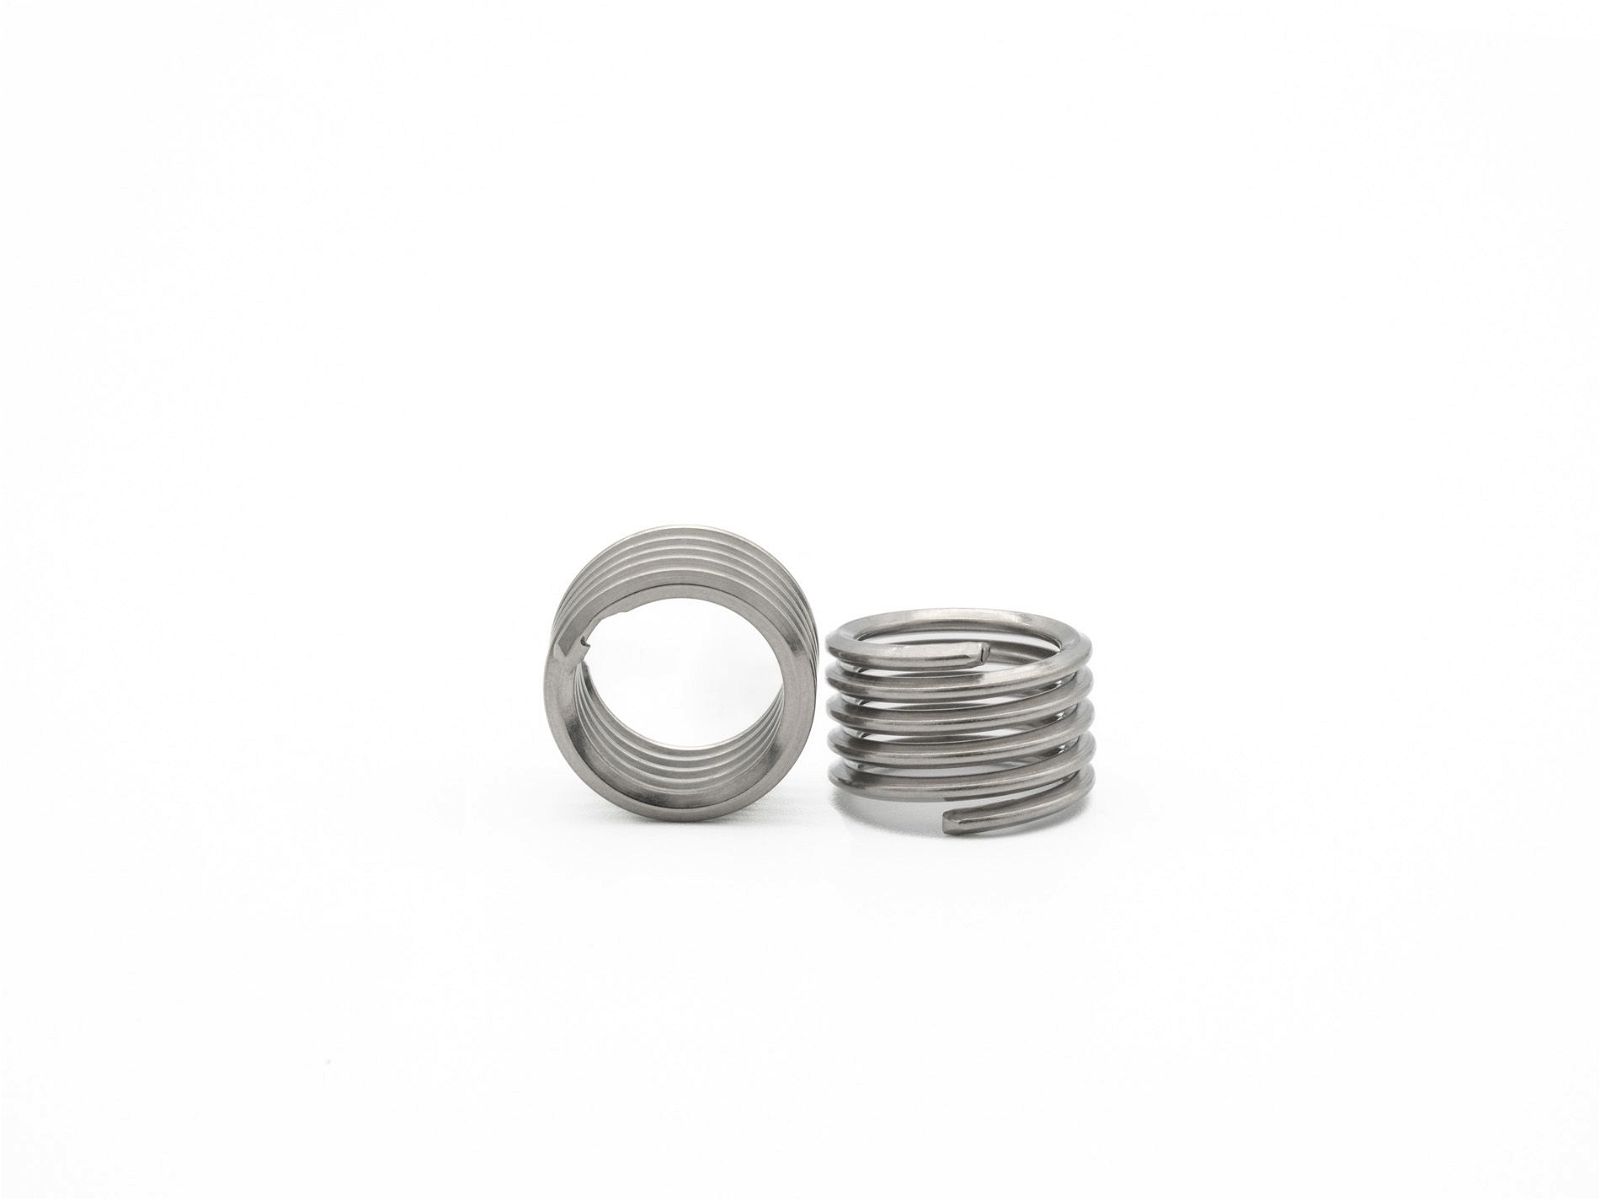 BaerCoil NoTang Wire Thread Inserts M 3 x 0.5 - 1.5 D (4.5 mm) - 100 pcs.